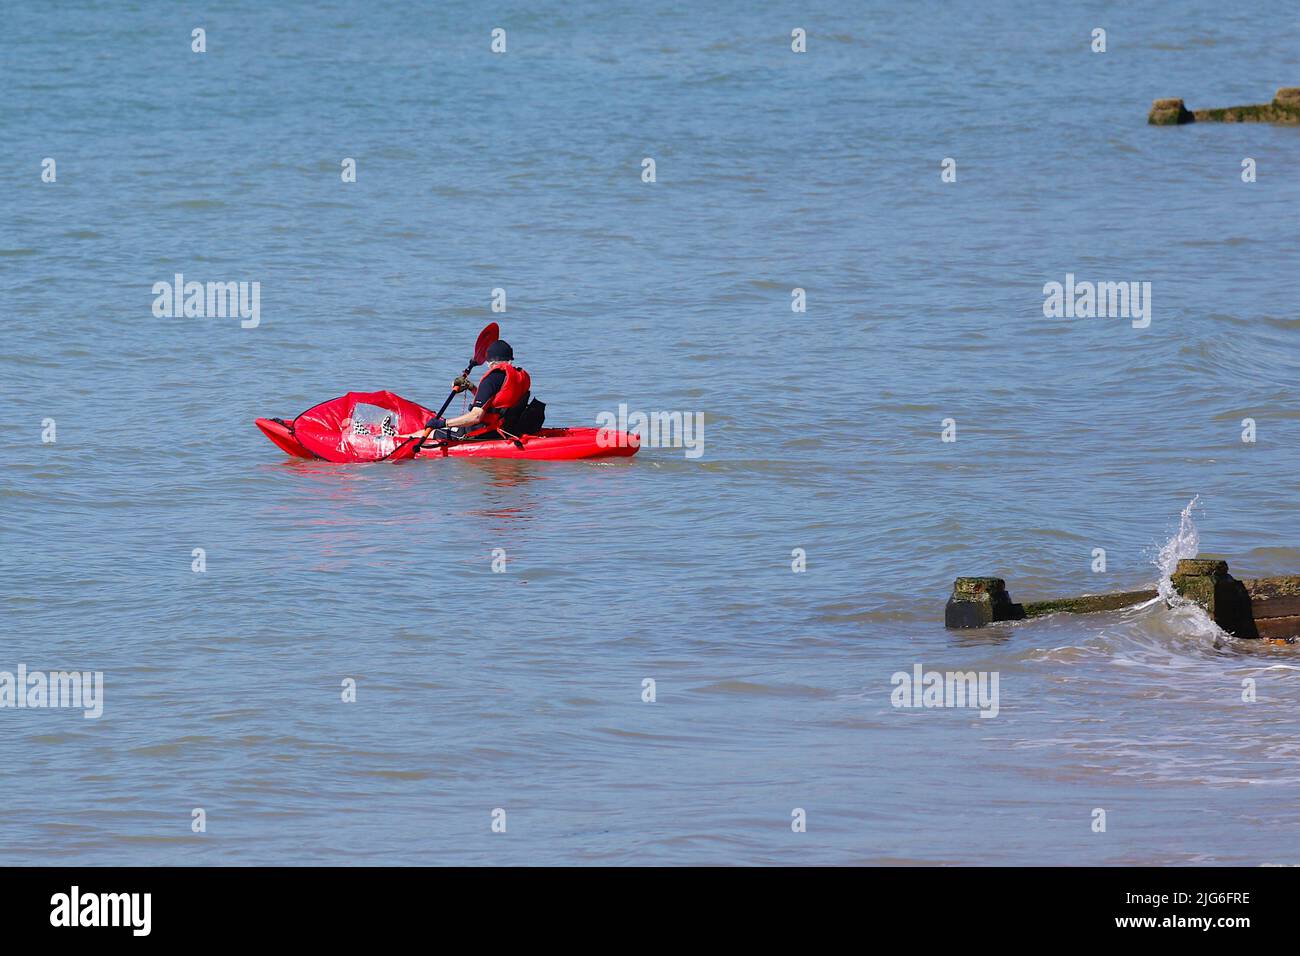 Hastings, East Sussex, UK. 08 Jul, 2022. UK Weather: Very hot and sunny at the seaside town of Hastings in East Sussex as Brits enjoy the very hot weather today and is expected to reach 29c in some parts of the UK. A kayaker heads out to sea. Photo Credit: Paul Lawrenson /Alamy Live News Stock Photo